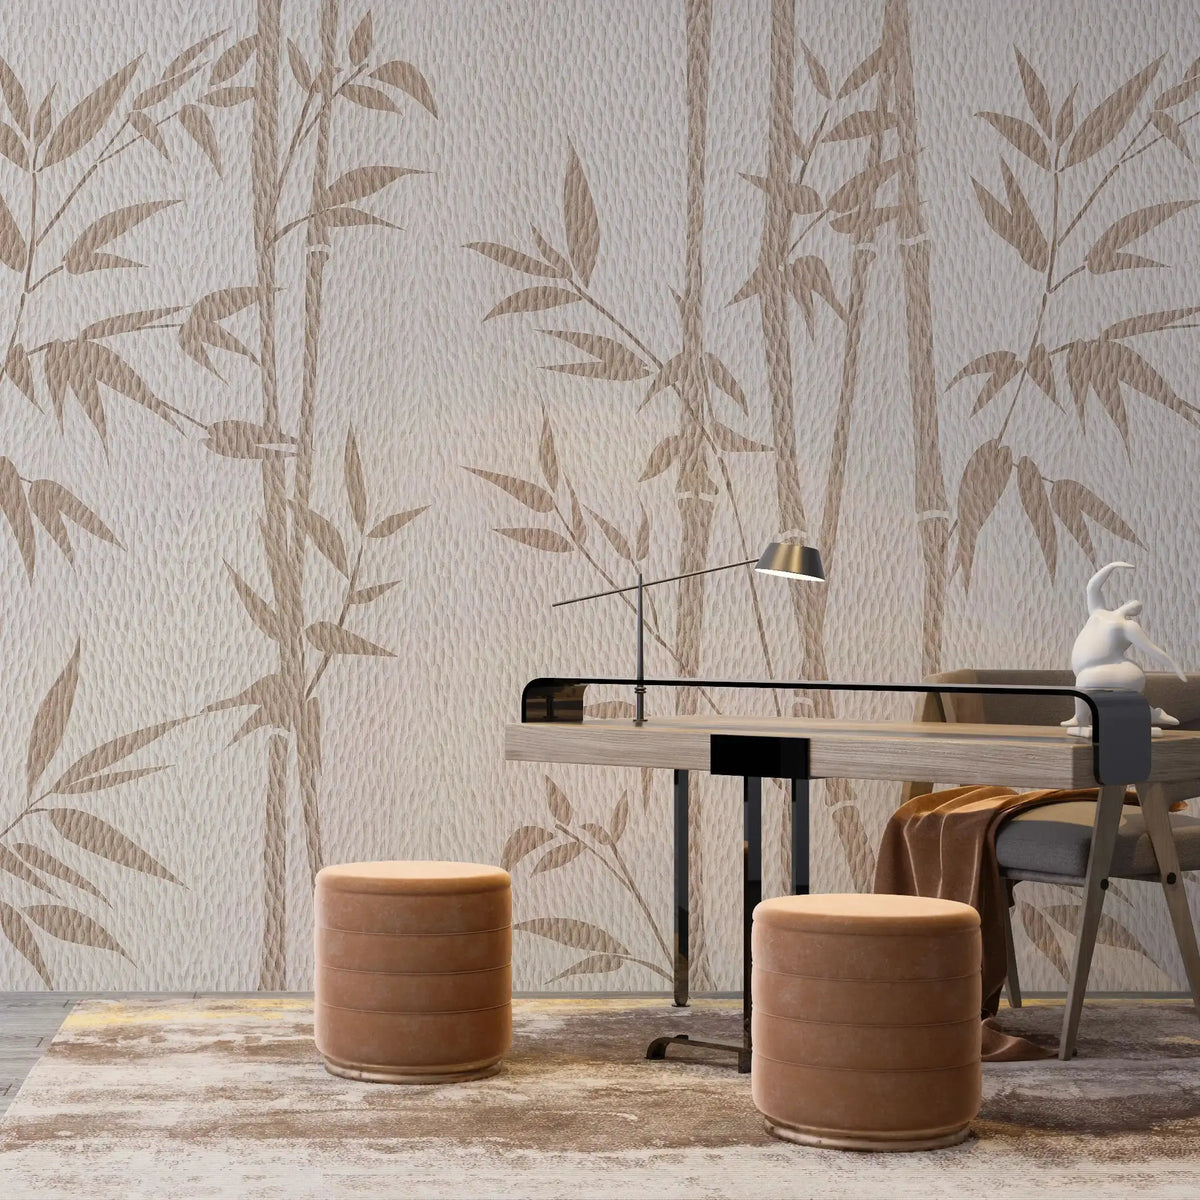 3020-D / Tropical Bamboo Leaf Wallpaper, Peel and Stick, Easy Install, Adhesive Boho Decor for Kitchen, Bathroom - Artevella